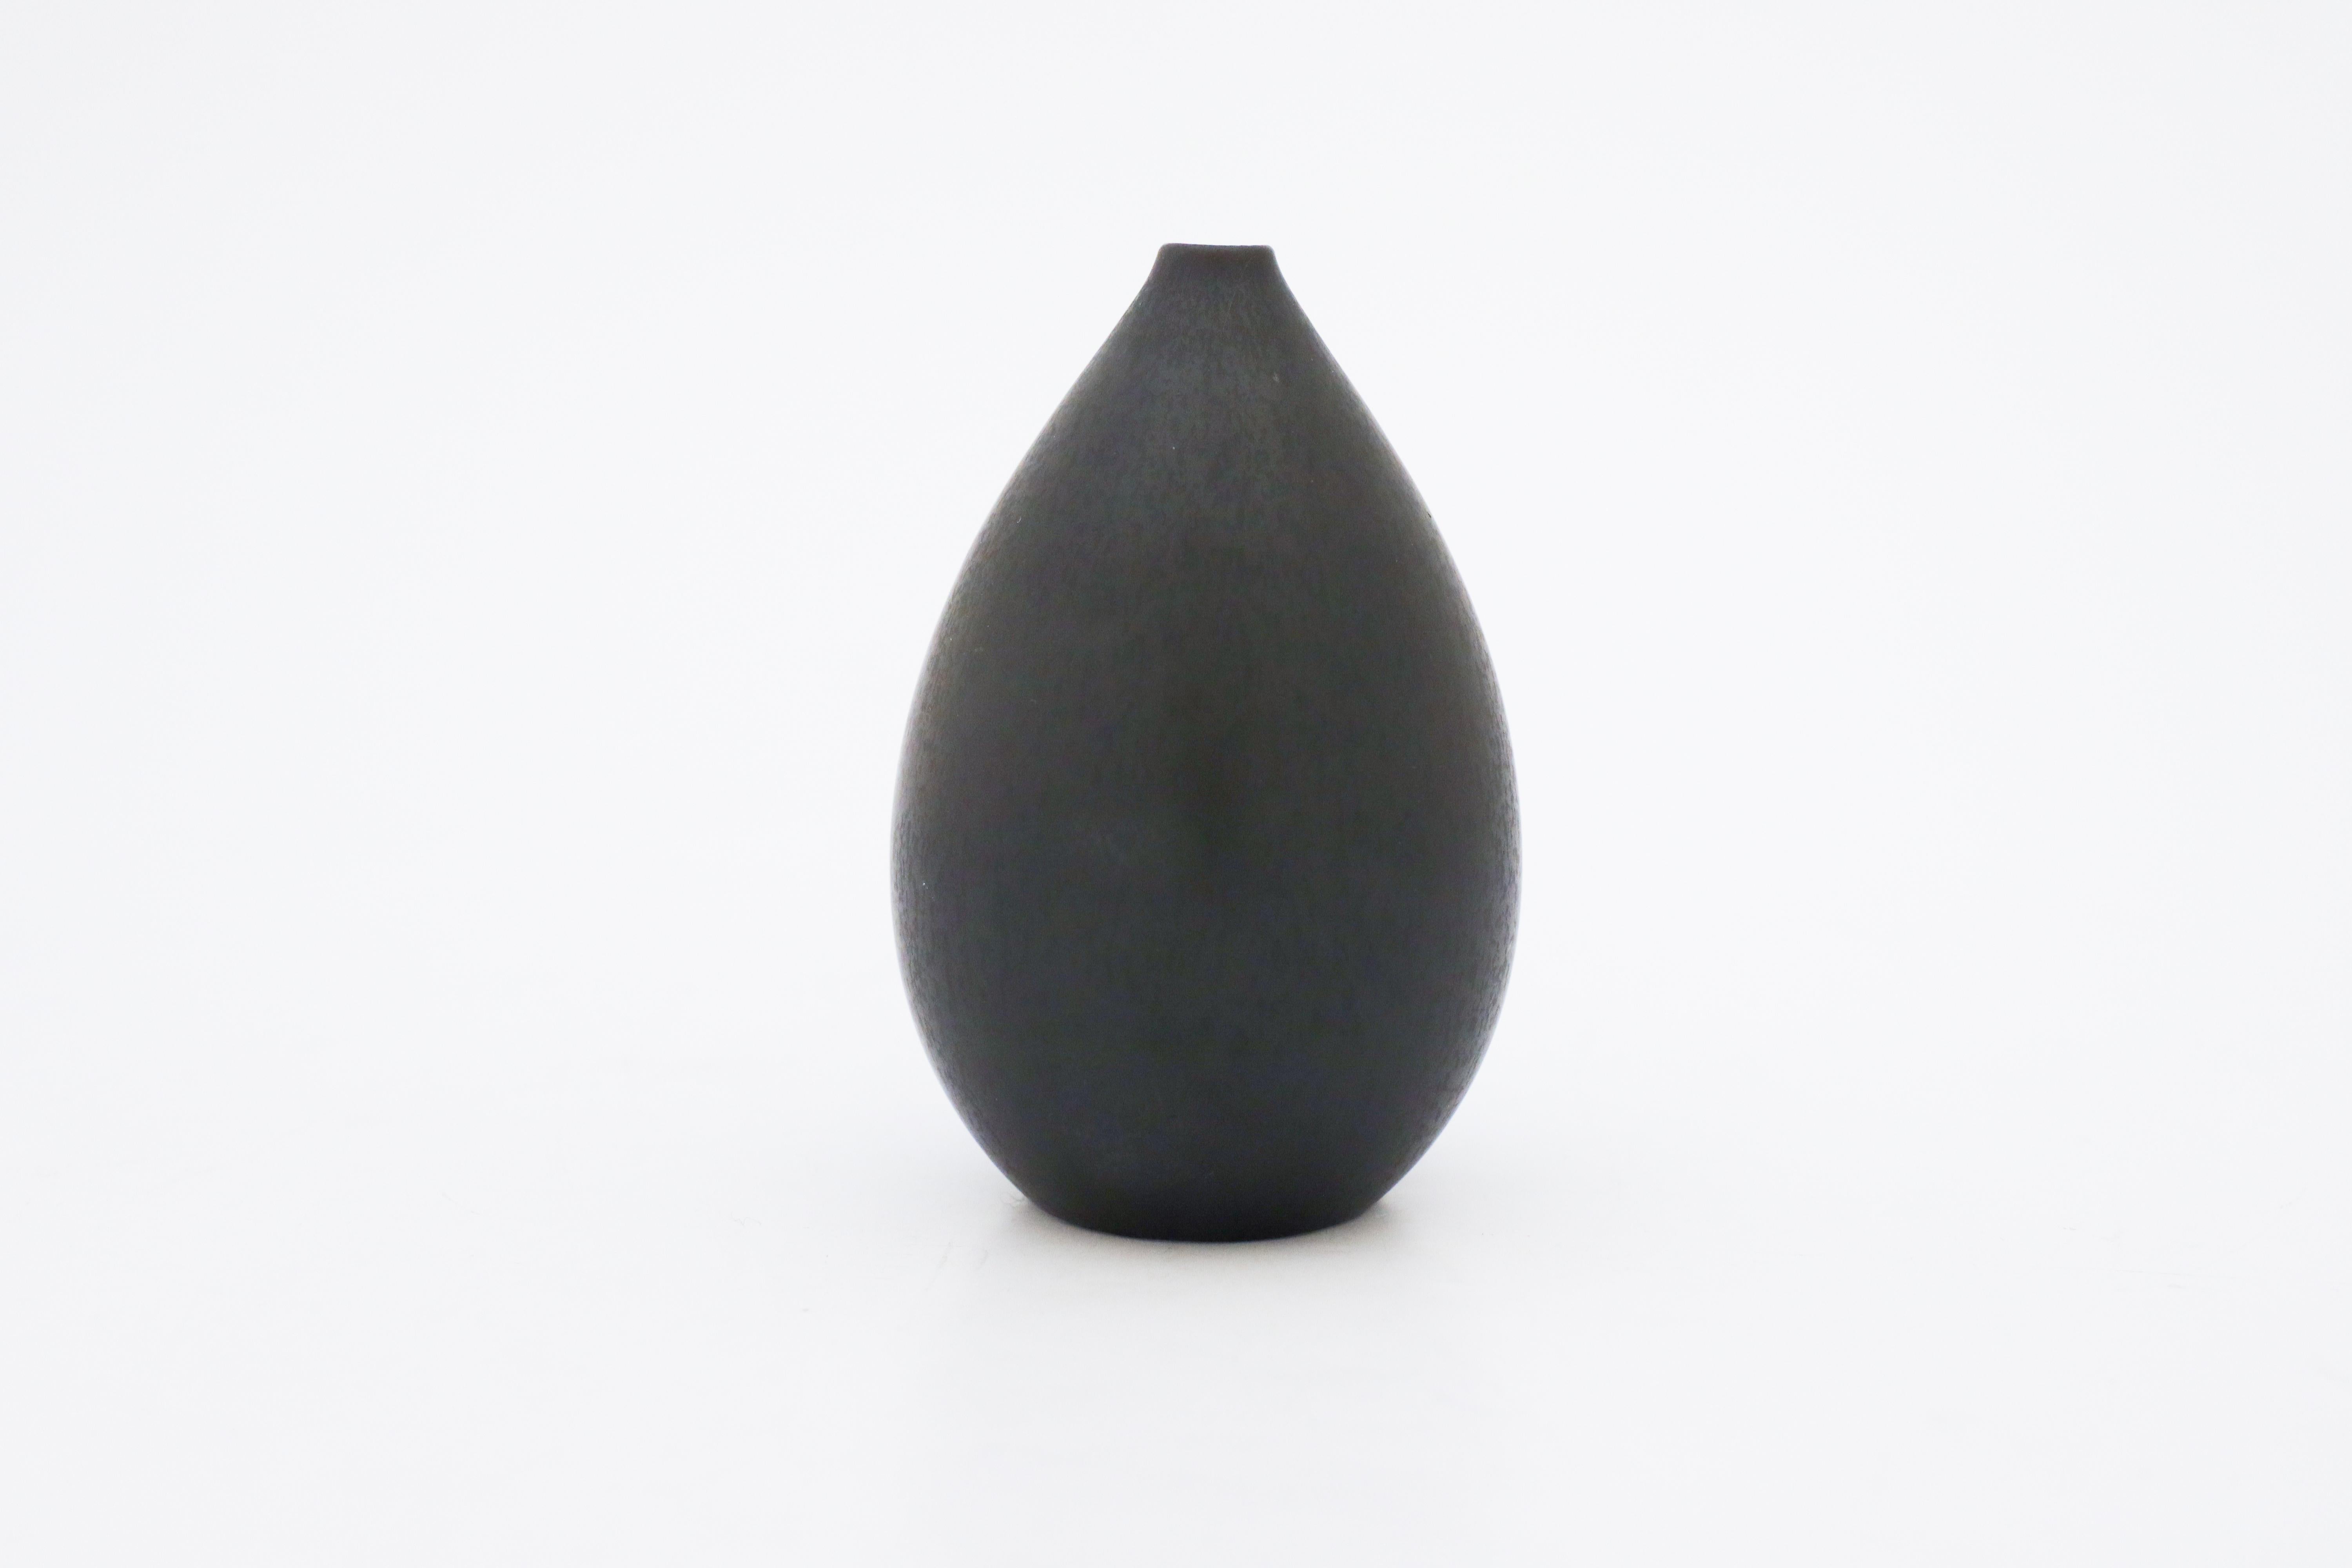 A beautiful midcentury Swedish vase in stoneware by Rörstrand, designed by Carl-Harry Stålhane.